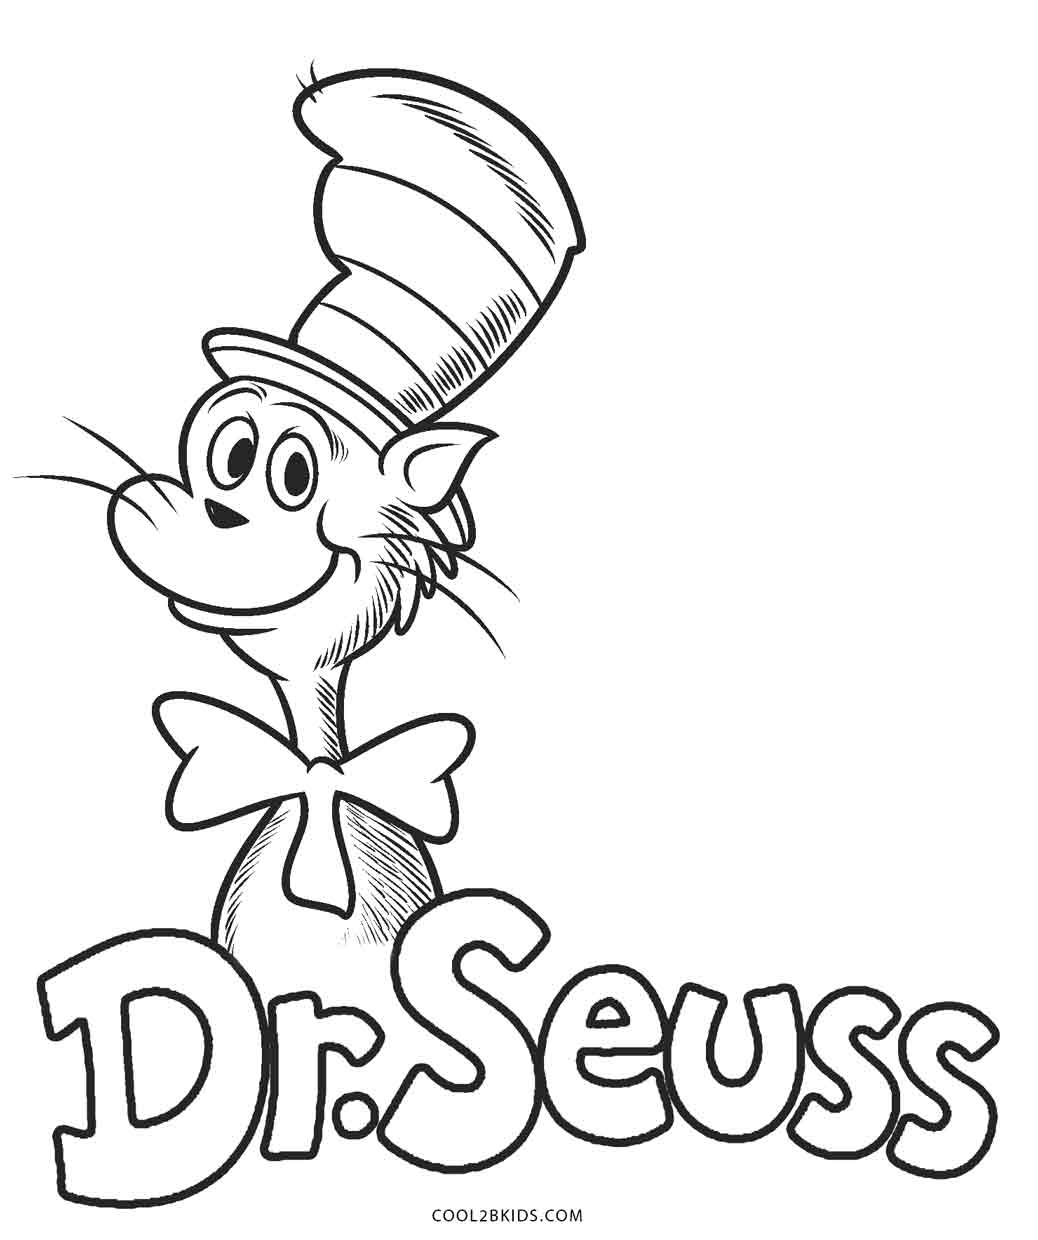 Free Printable Pictures Of Dr Seuss - Free Printable Templates